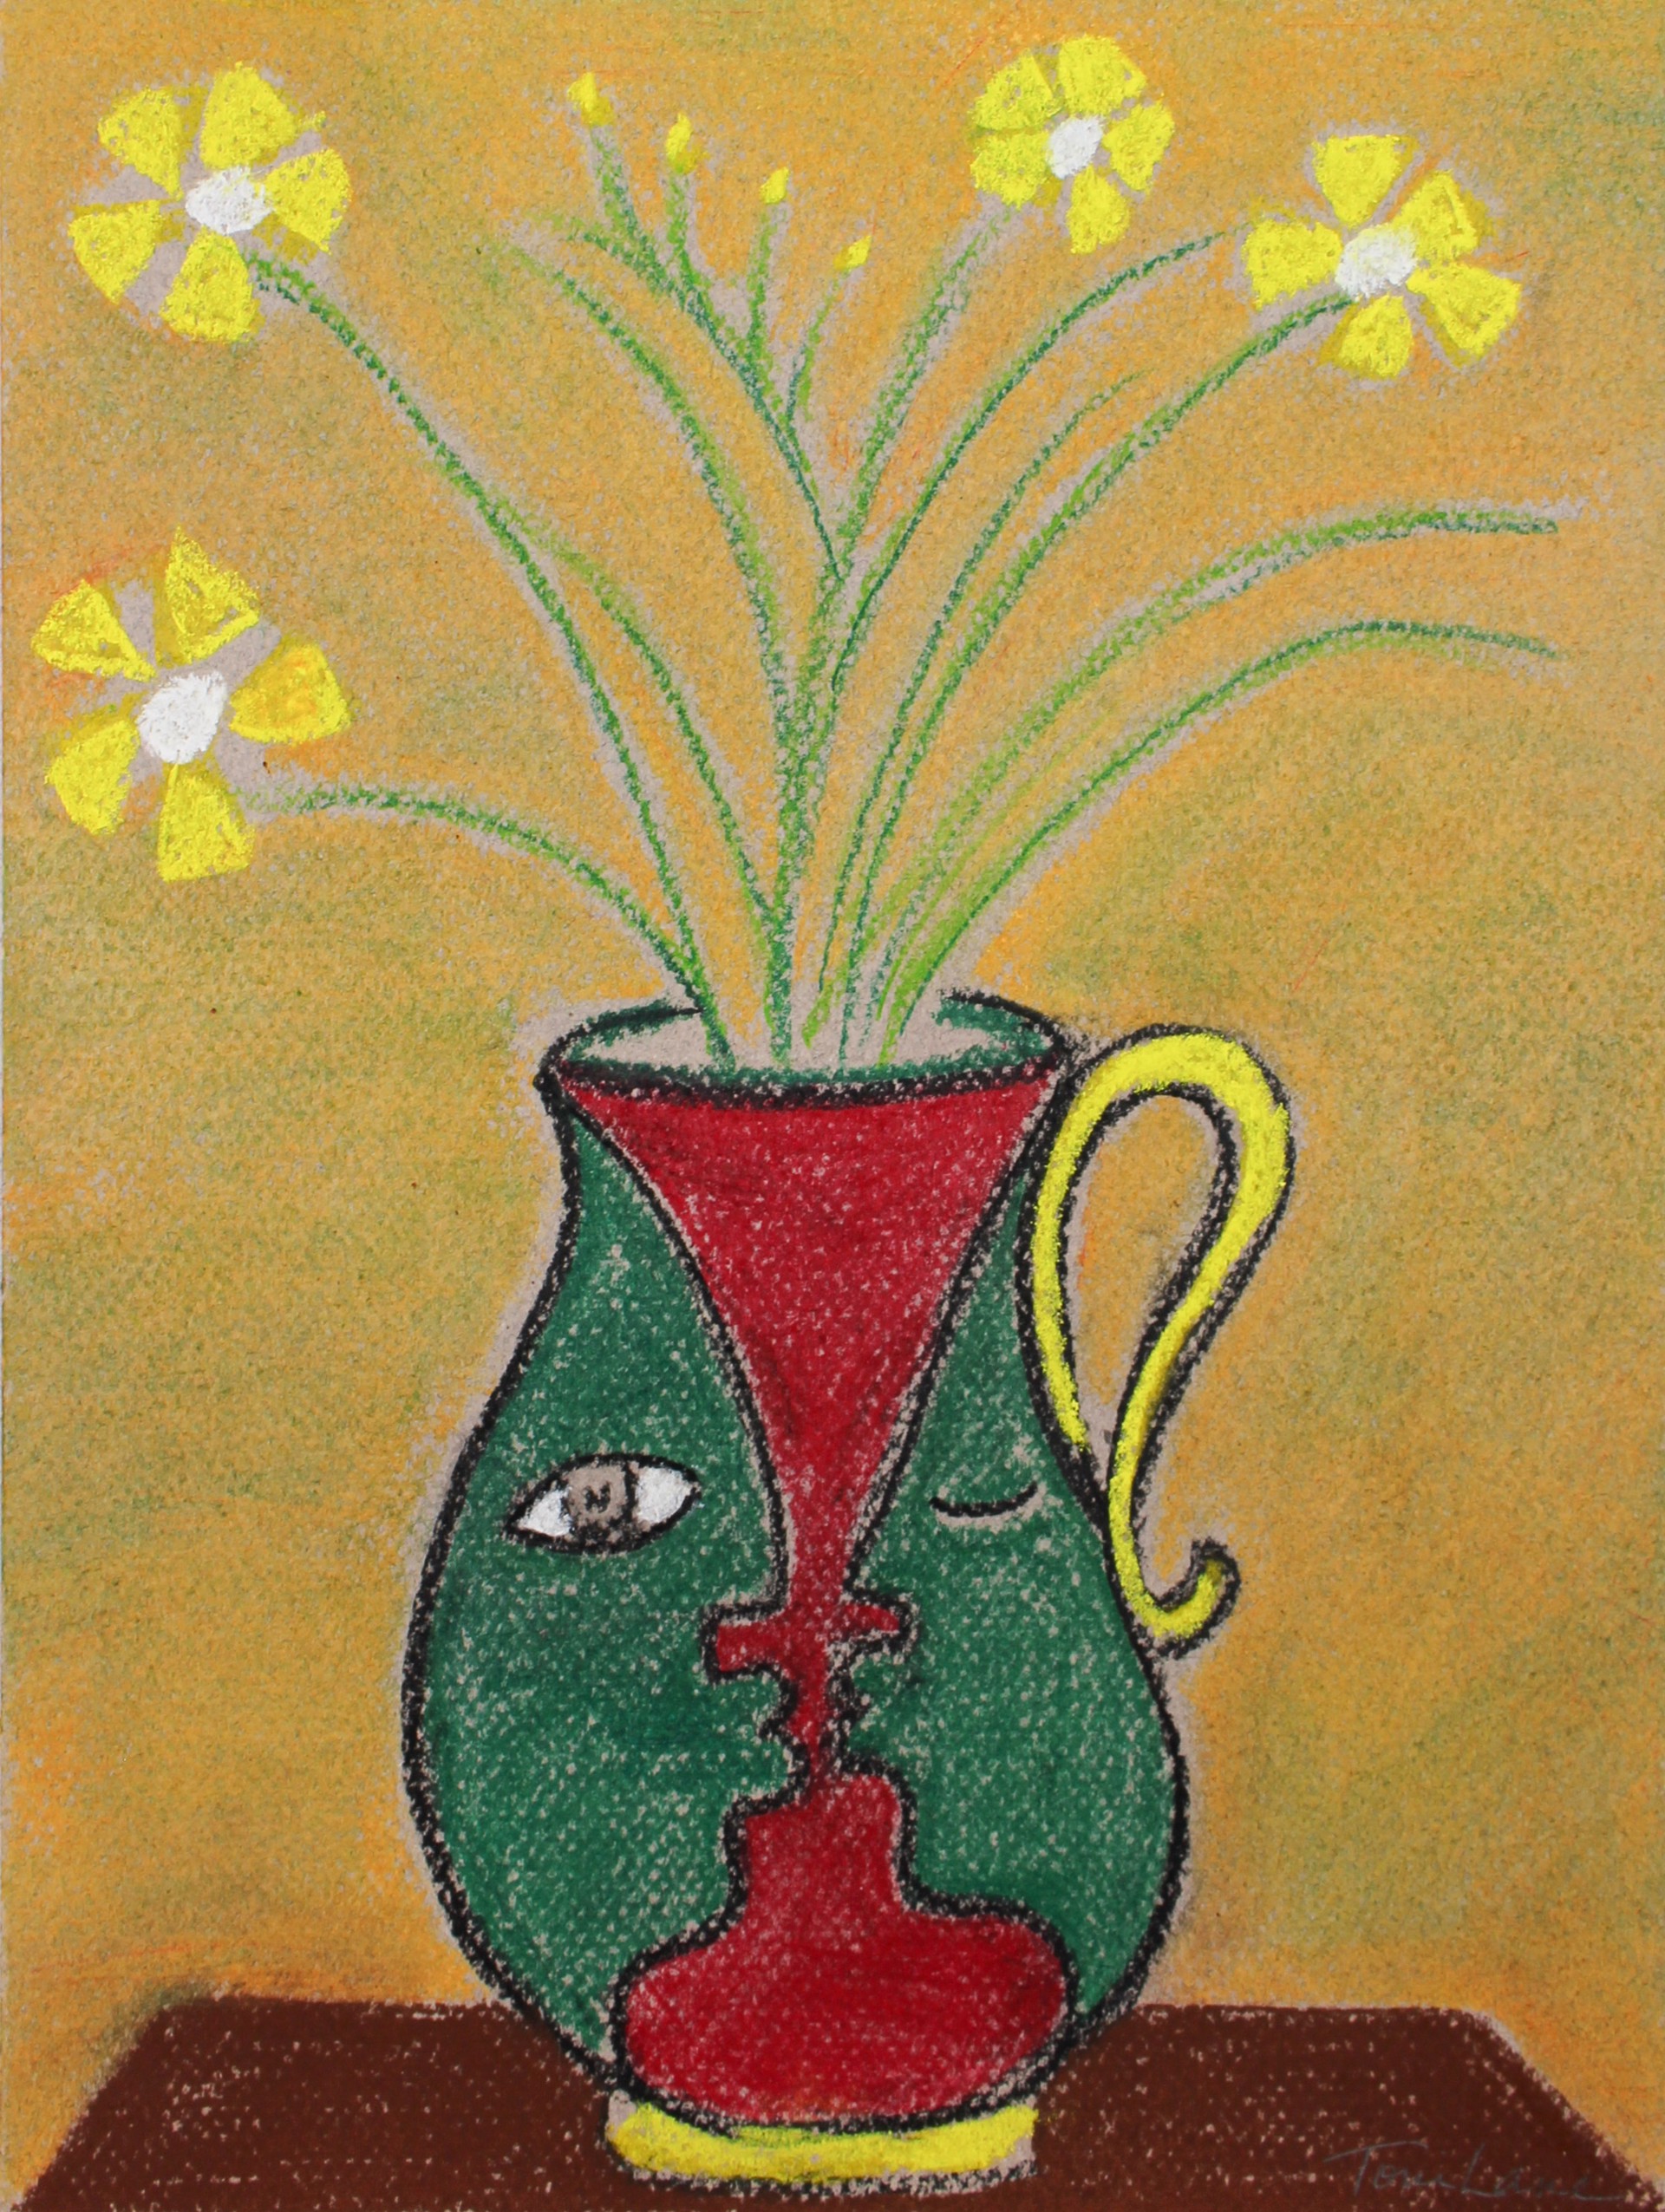 Vase with Yellow Flowers by Toni Lane